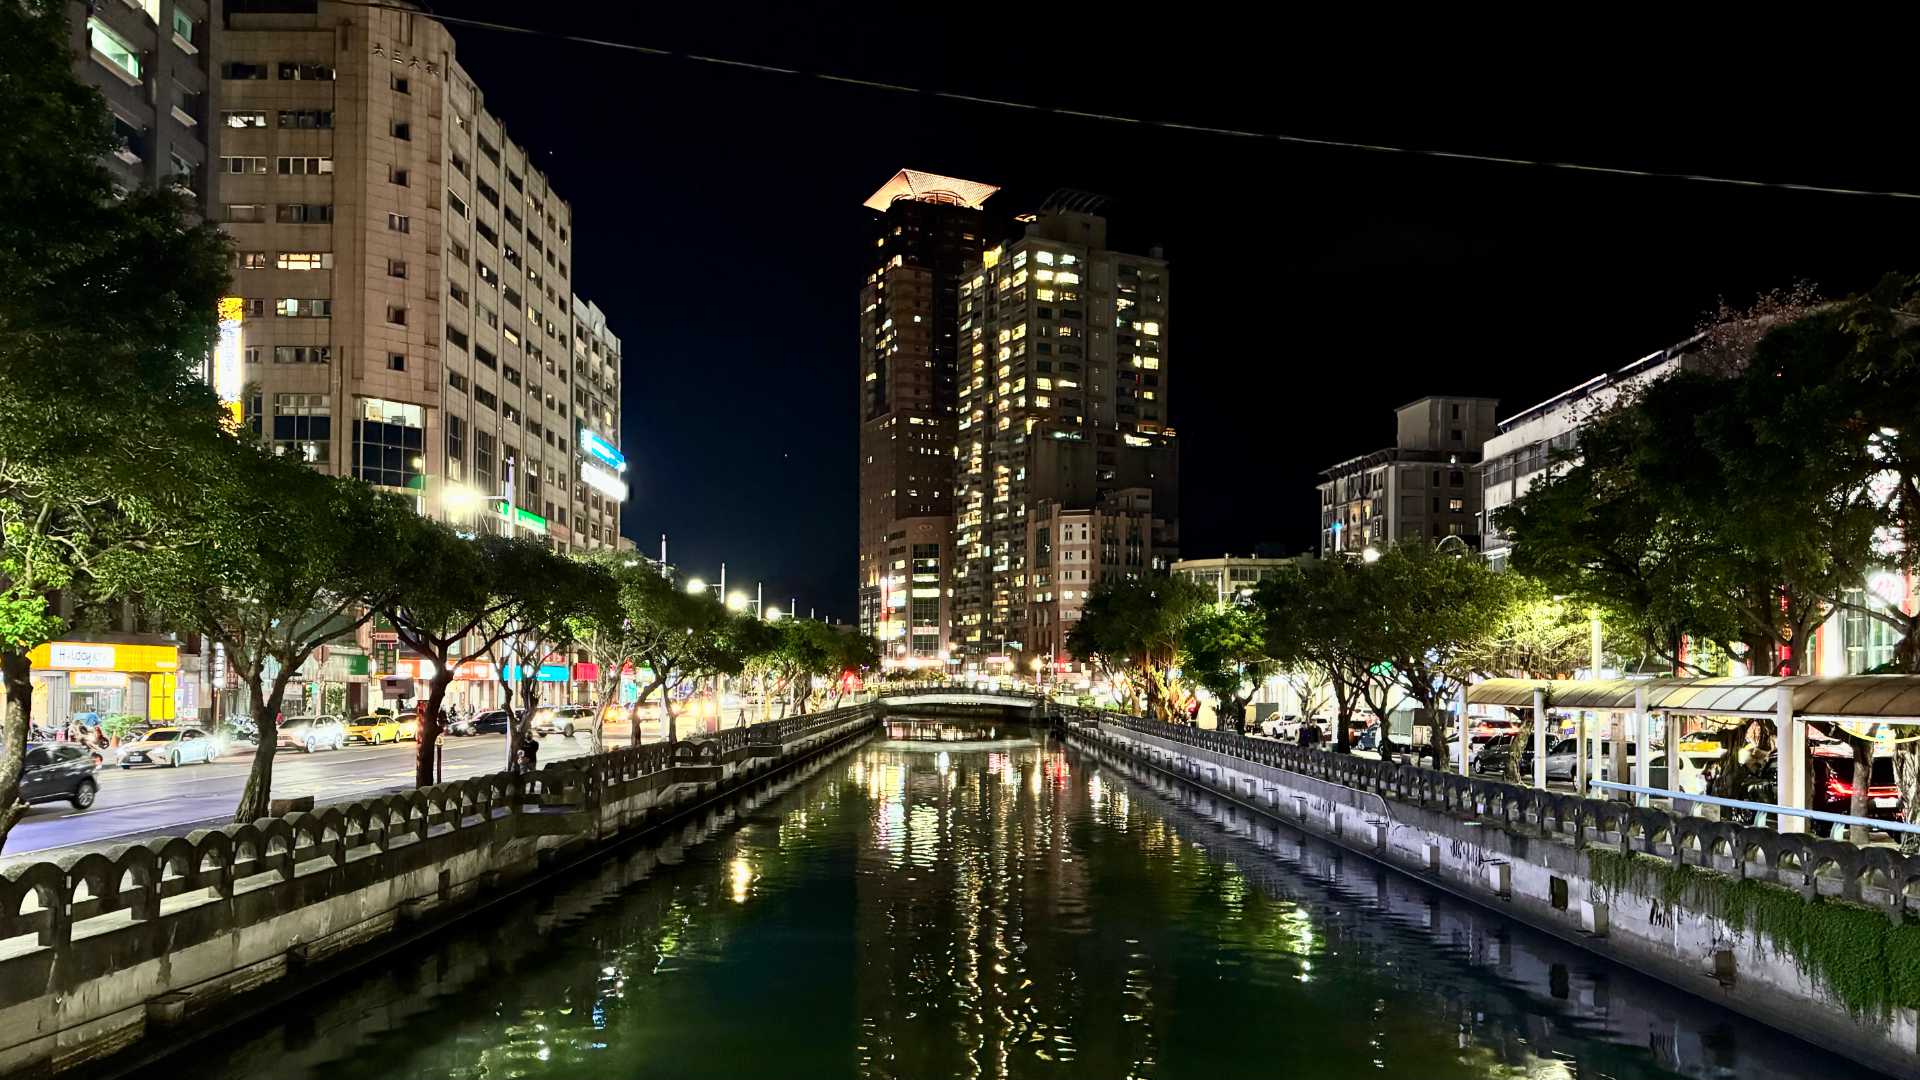 Nighttime view of a canal in central Keelung City, Taiwan.